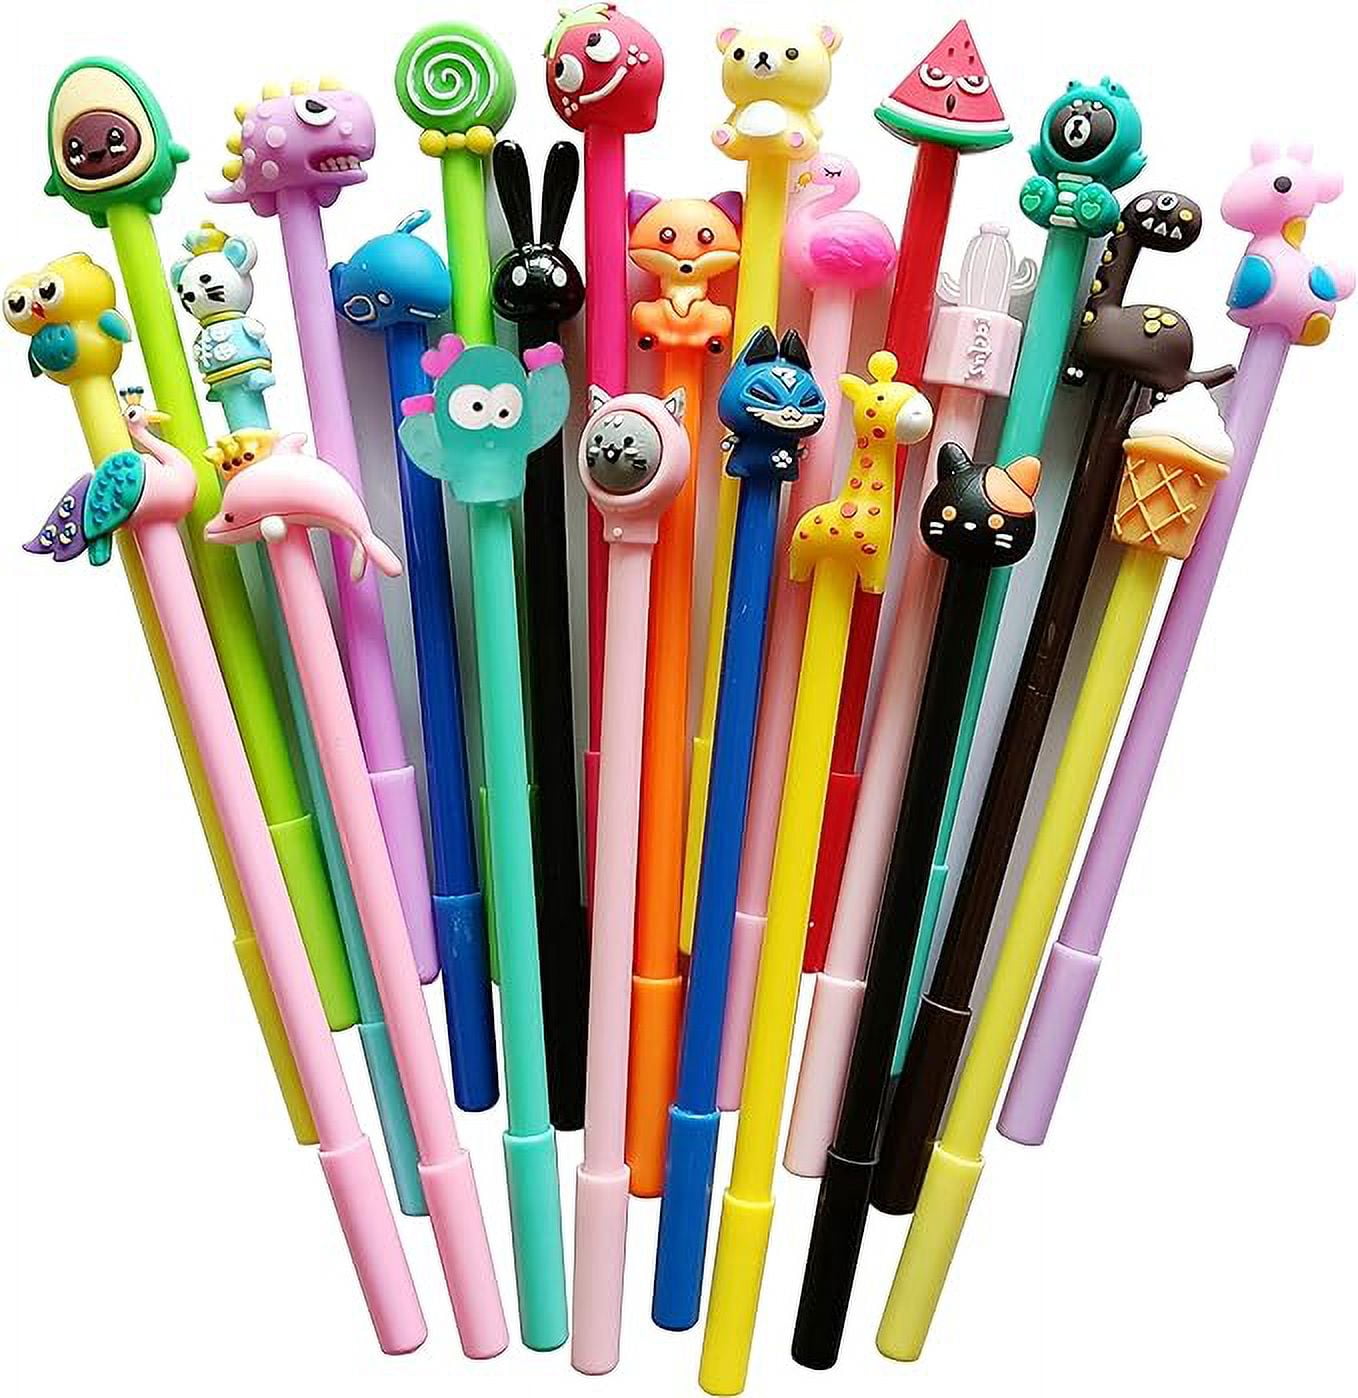 Animal and character ink pens – Express Your Sassy Self